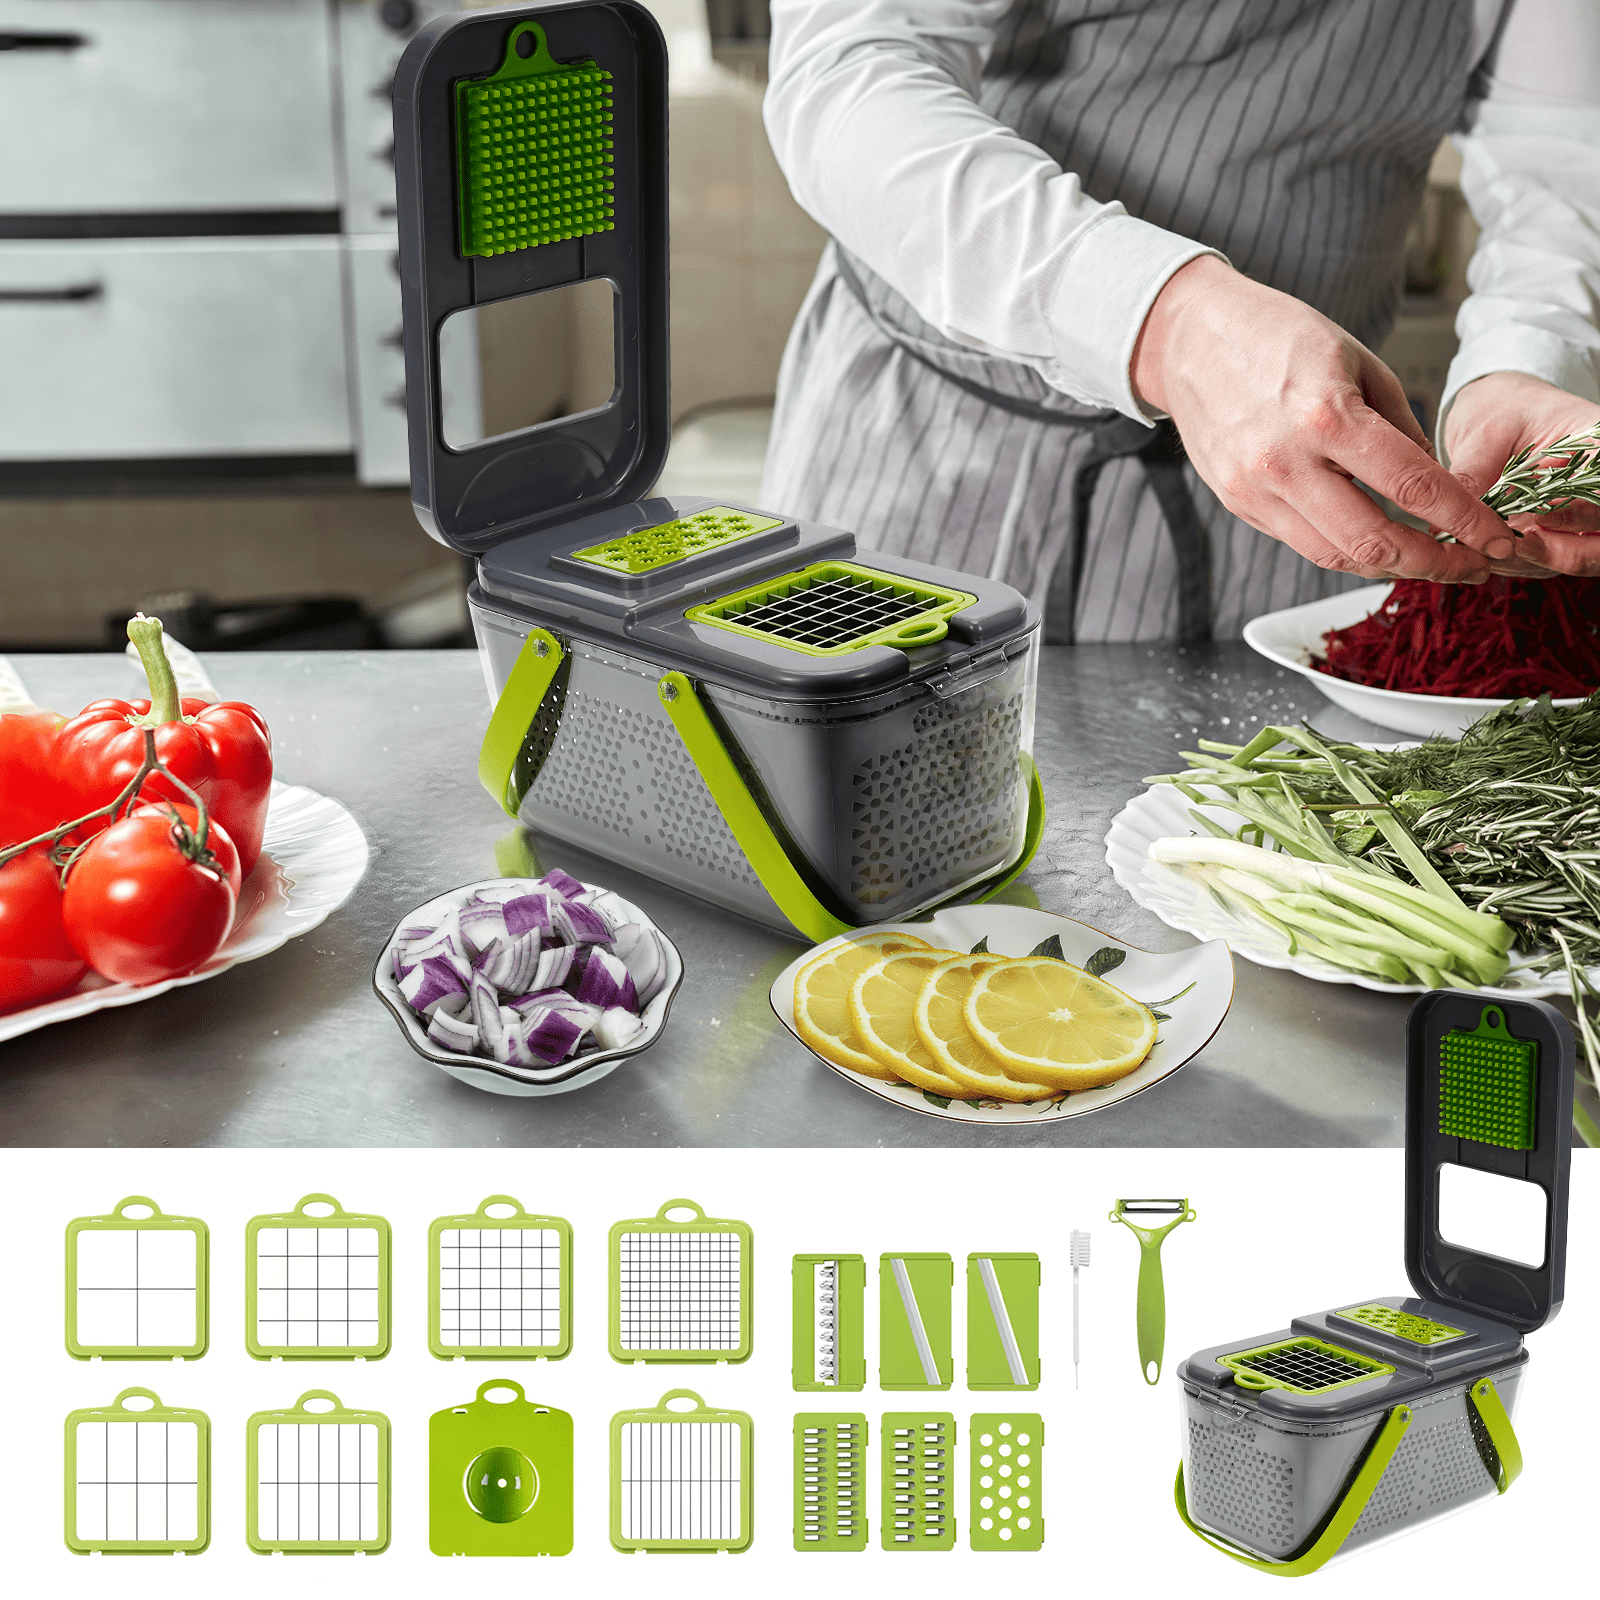 Cheese Grater with Food Saver Container 2 in1 Fruit Vegetable Chopper Onion Choppers with Container Stainless Steel Rectangle Box and Graters, Black